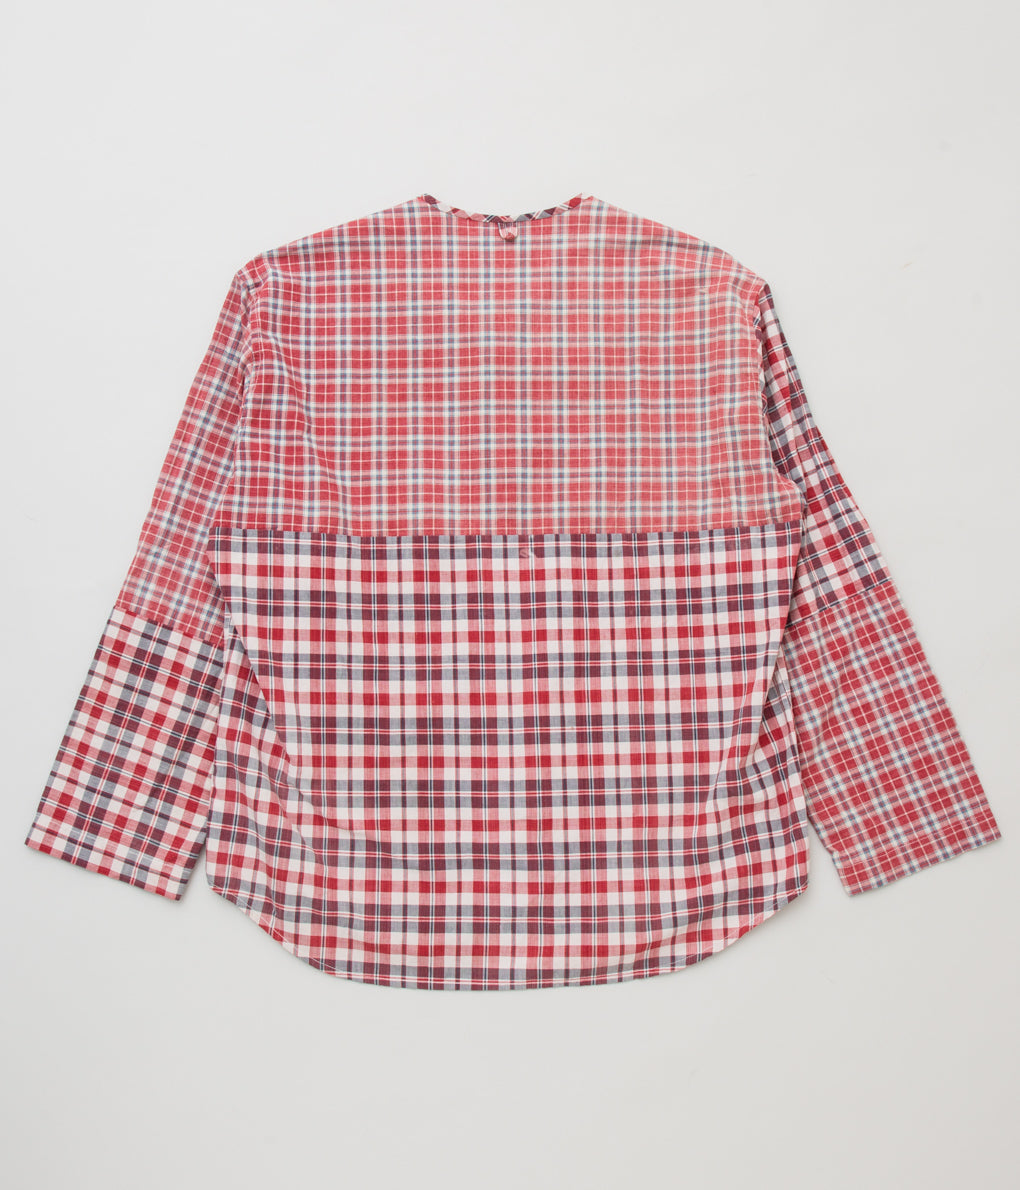 OLIVER CHURCH "SOFT SHIRT (ANTIQUE/VINTAGE FRENCH COTTON/LINEN)"(RED CHECKS/PLAID PATCH WORK)